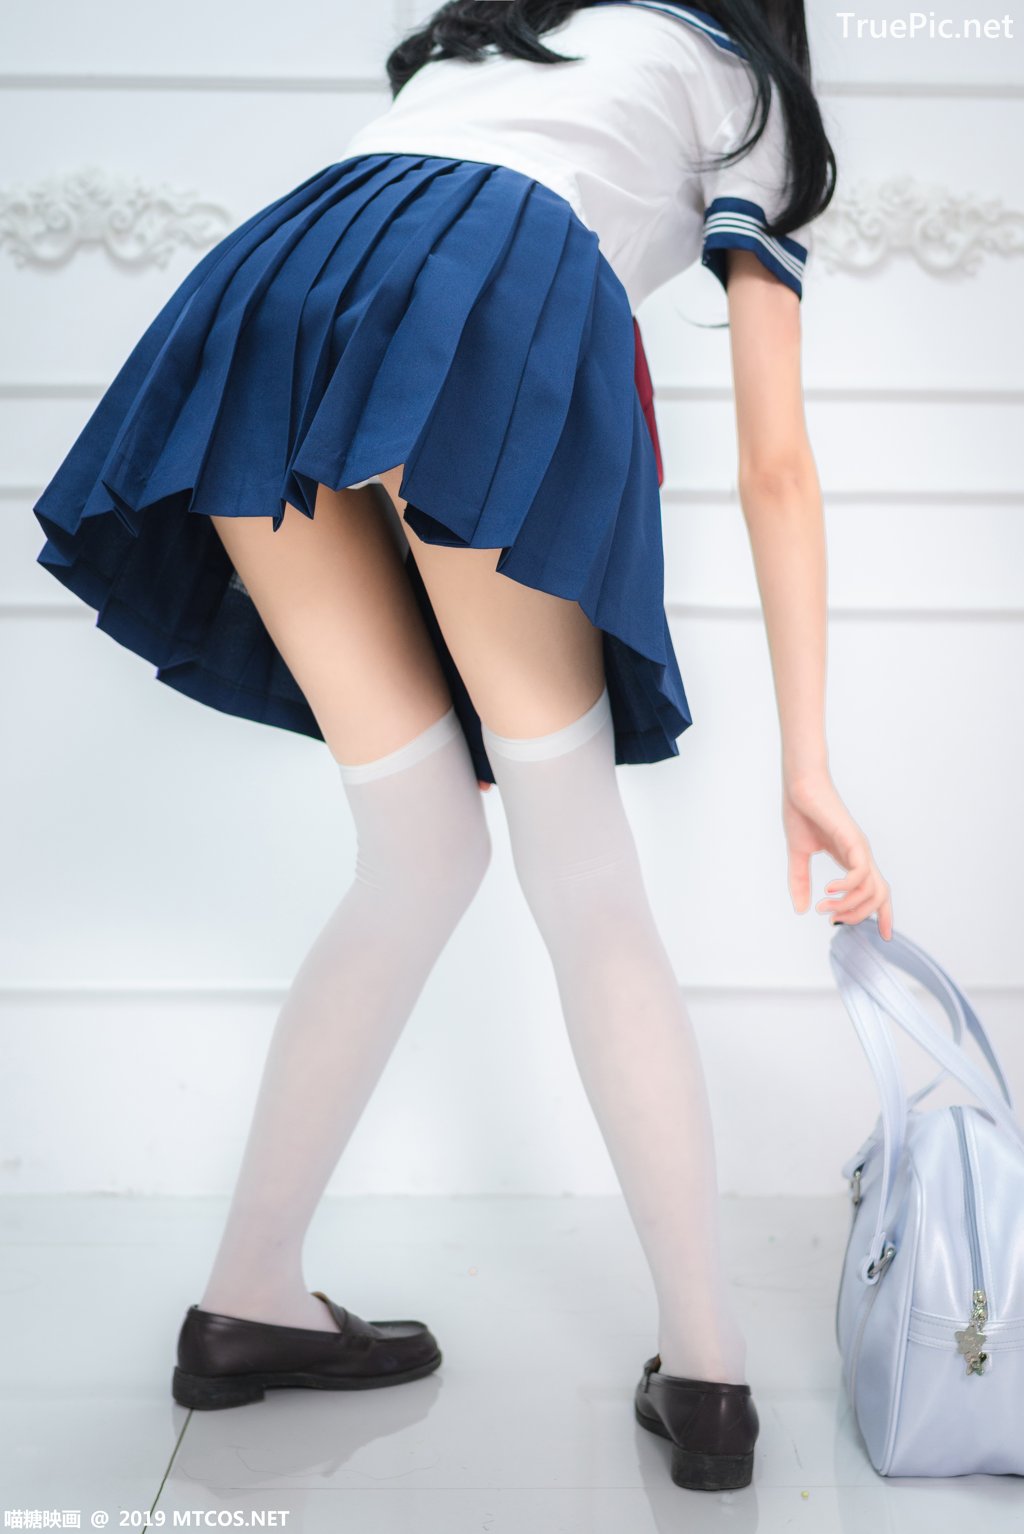 Image-MTCos-喵糖映画-Vol-012–Chinese-Pretty-Model-Cute-School-Girl-With-Sailor-Dress-TruePic.net- Picture-19